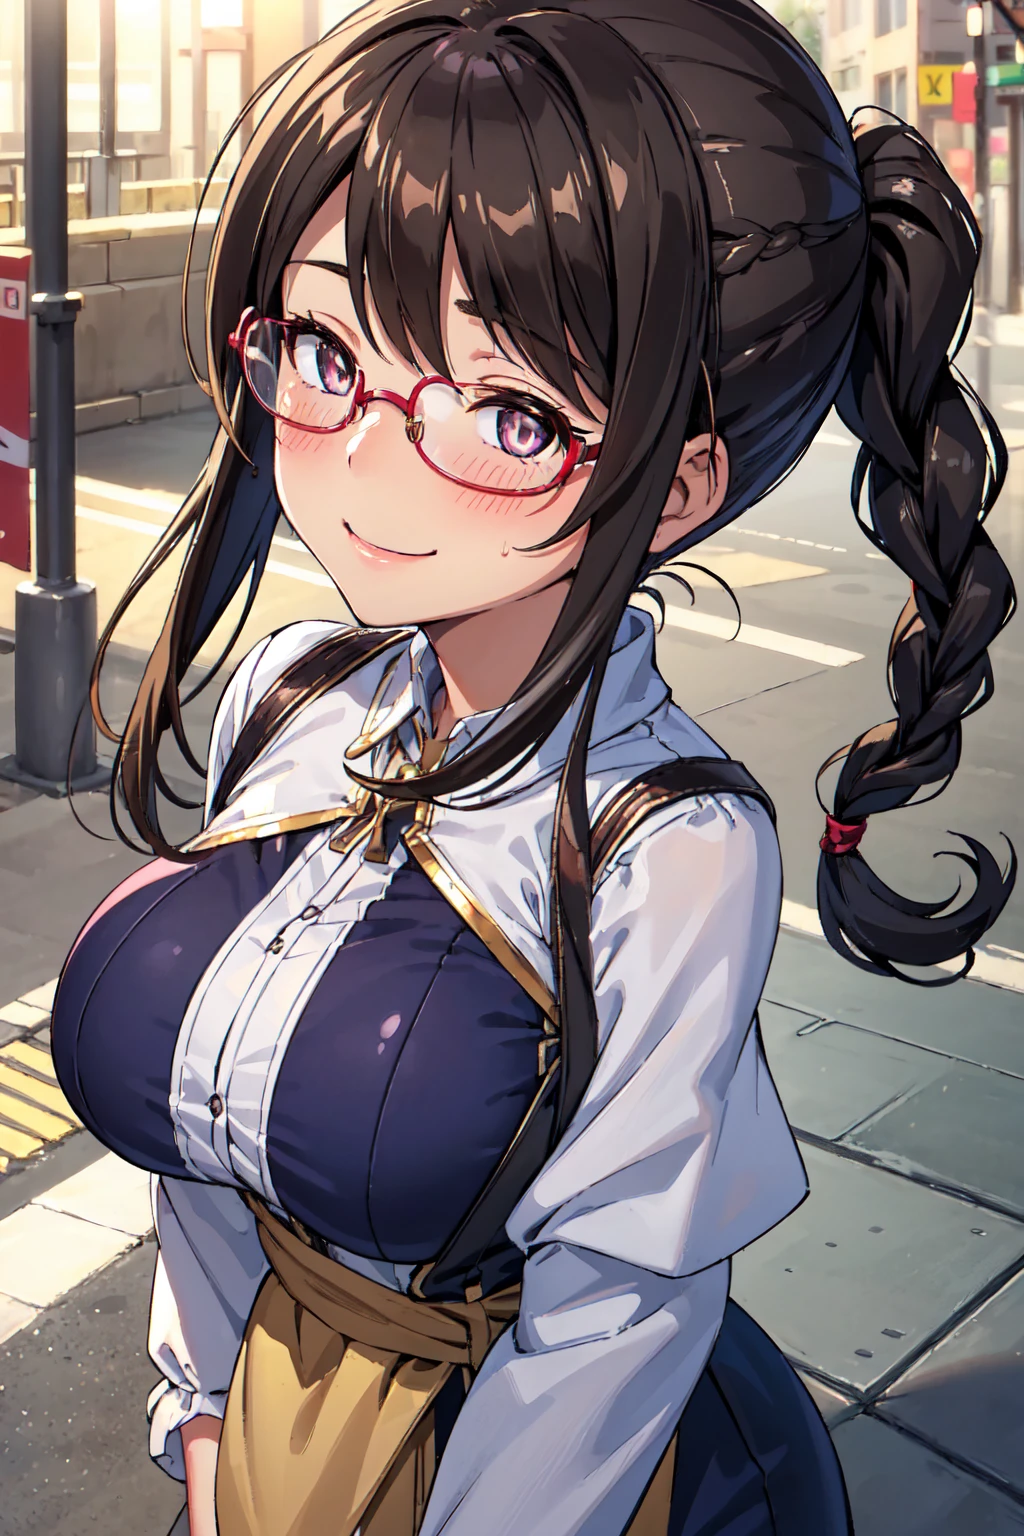 (high quality, High resolution, Finer details), Sidewalk, Side view, alone, girl, Braided hair, , Sparkling eyes, (large round frame glasses), (fine grain), Big Breasts, ((A kind smile)), blush, Sweat, Oily skin, (Focus plane), Shallow depth of field